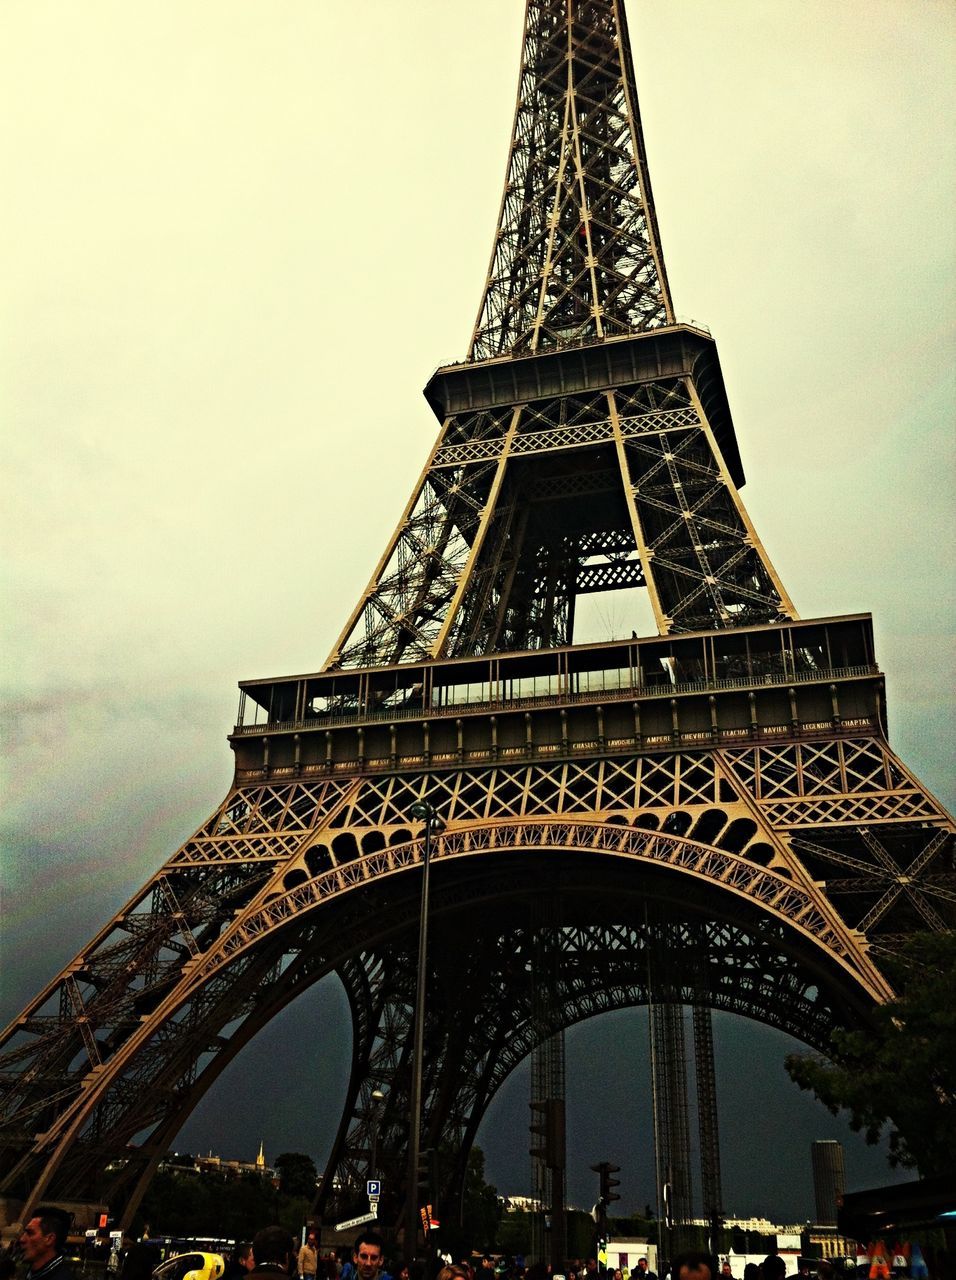 eiffel tower, famous place, international landmark, architecture, travel destinations, built structure, tourism, capital cities, travel, culture, tower, tall - high, metal, history, low angle view, city, sky, engineering, architectural feature, bridge - man made structure